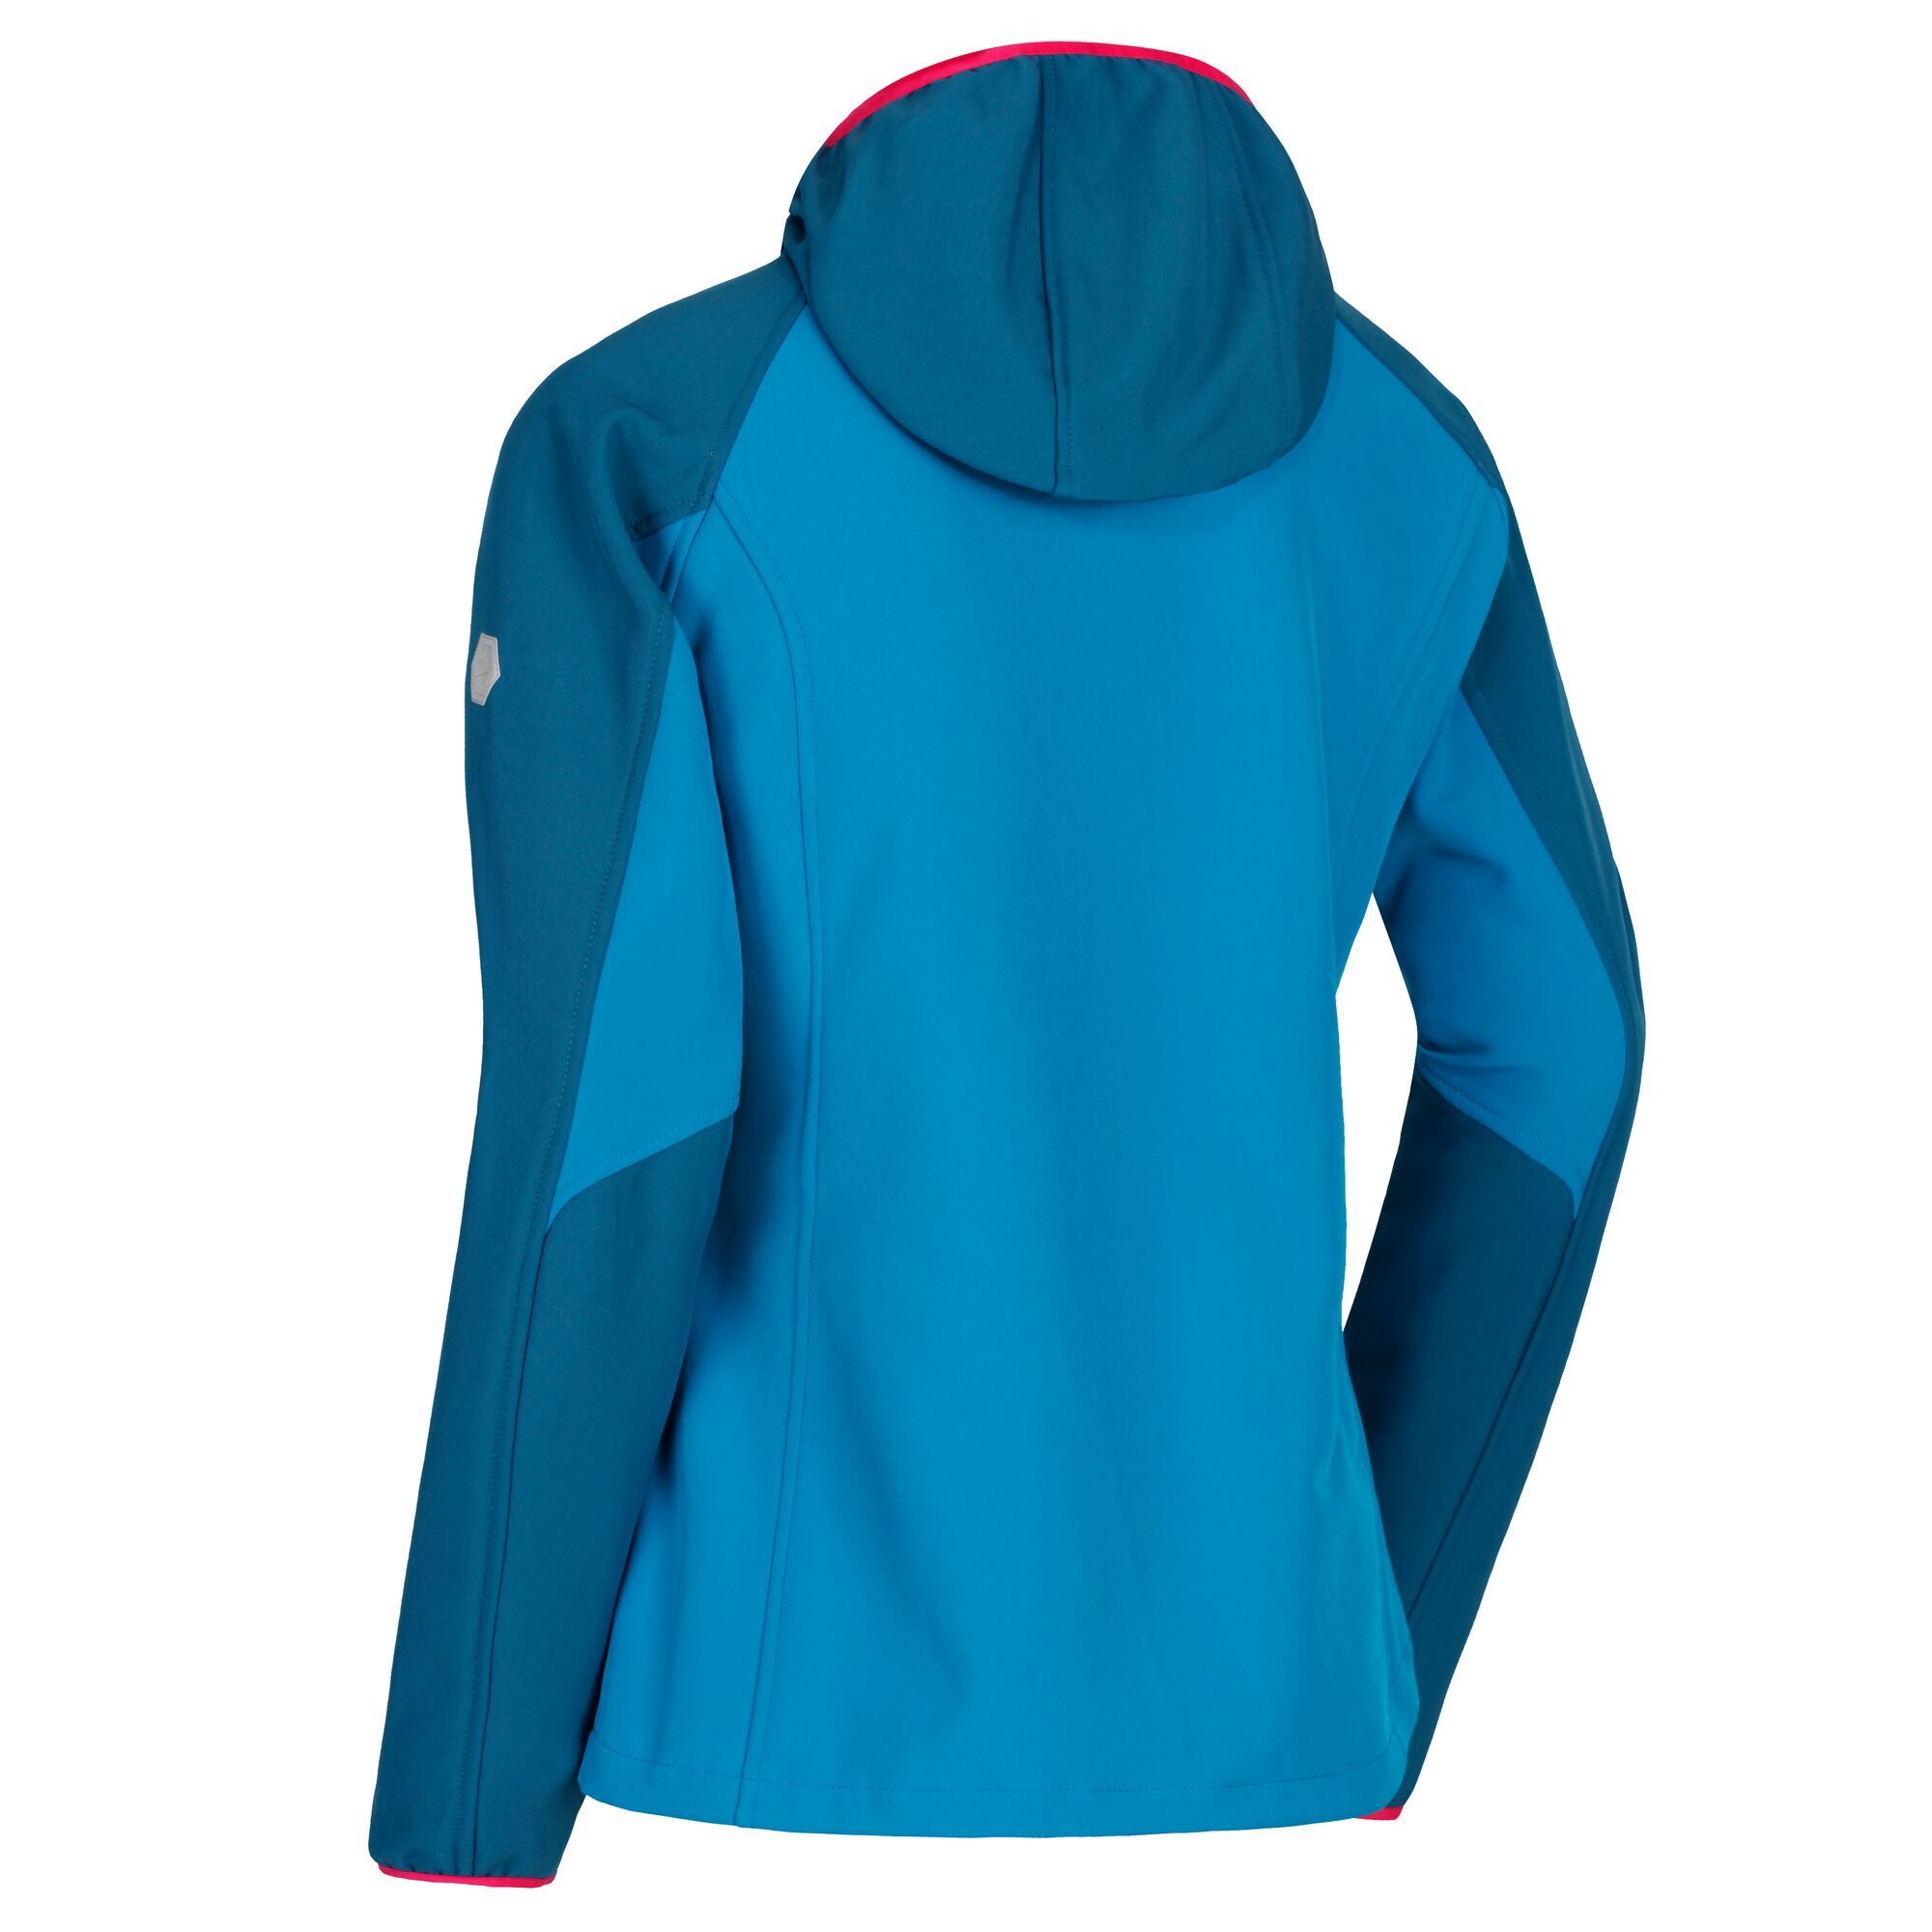 100% Polyester. Streamlined protection for active days at altitude. Technical softshell hoody. Durable and warm. Offers stretch and provides wind and water resistance. Peaked hood with 2 way adjusters. Stretch binding cuffs and hem. Zipped pockets.